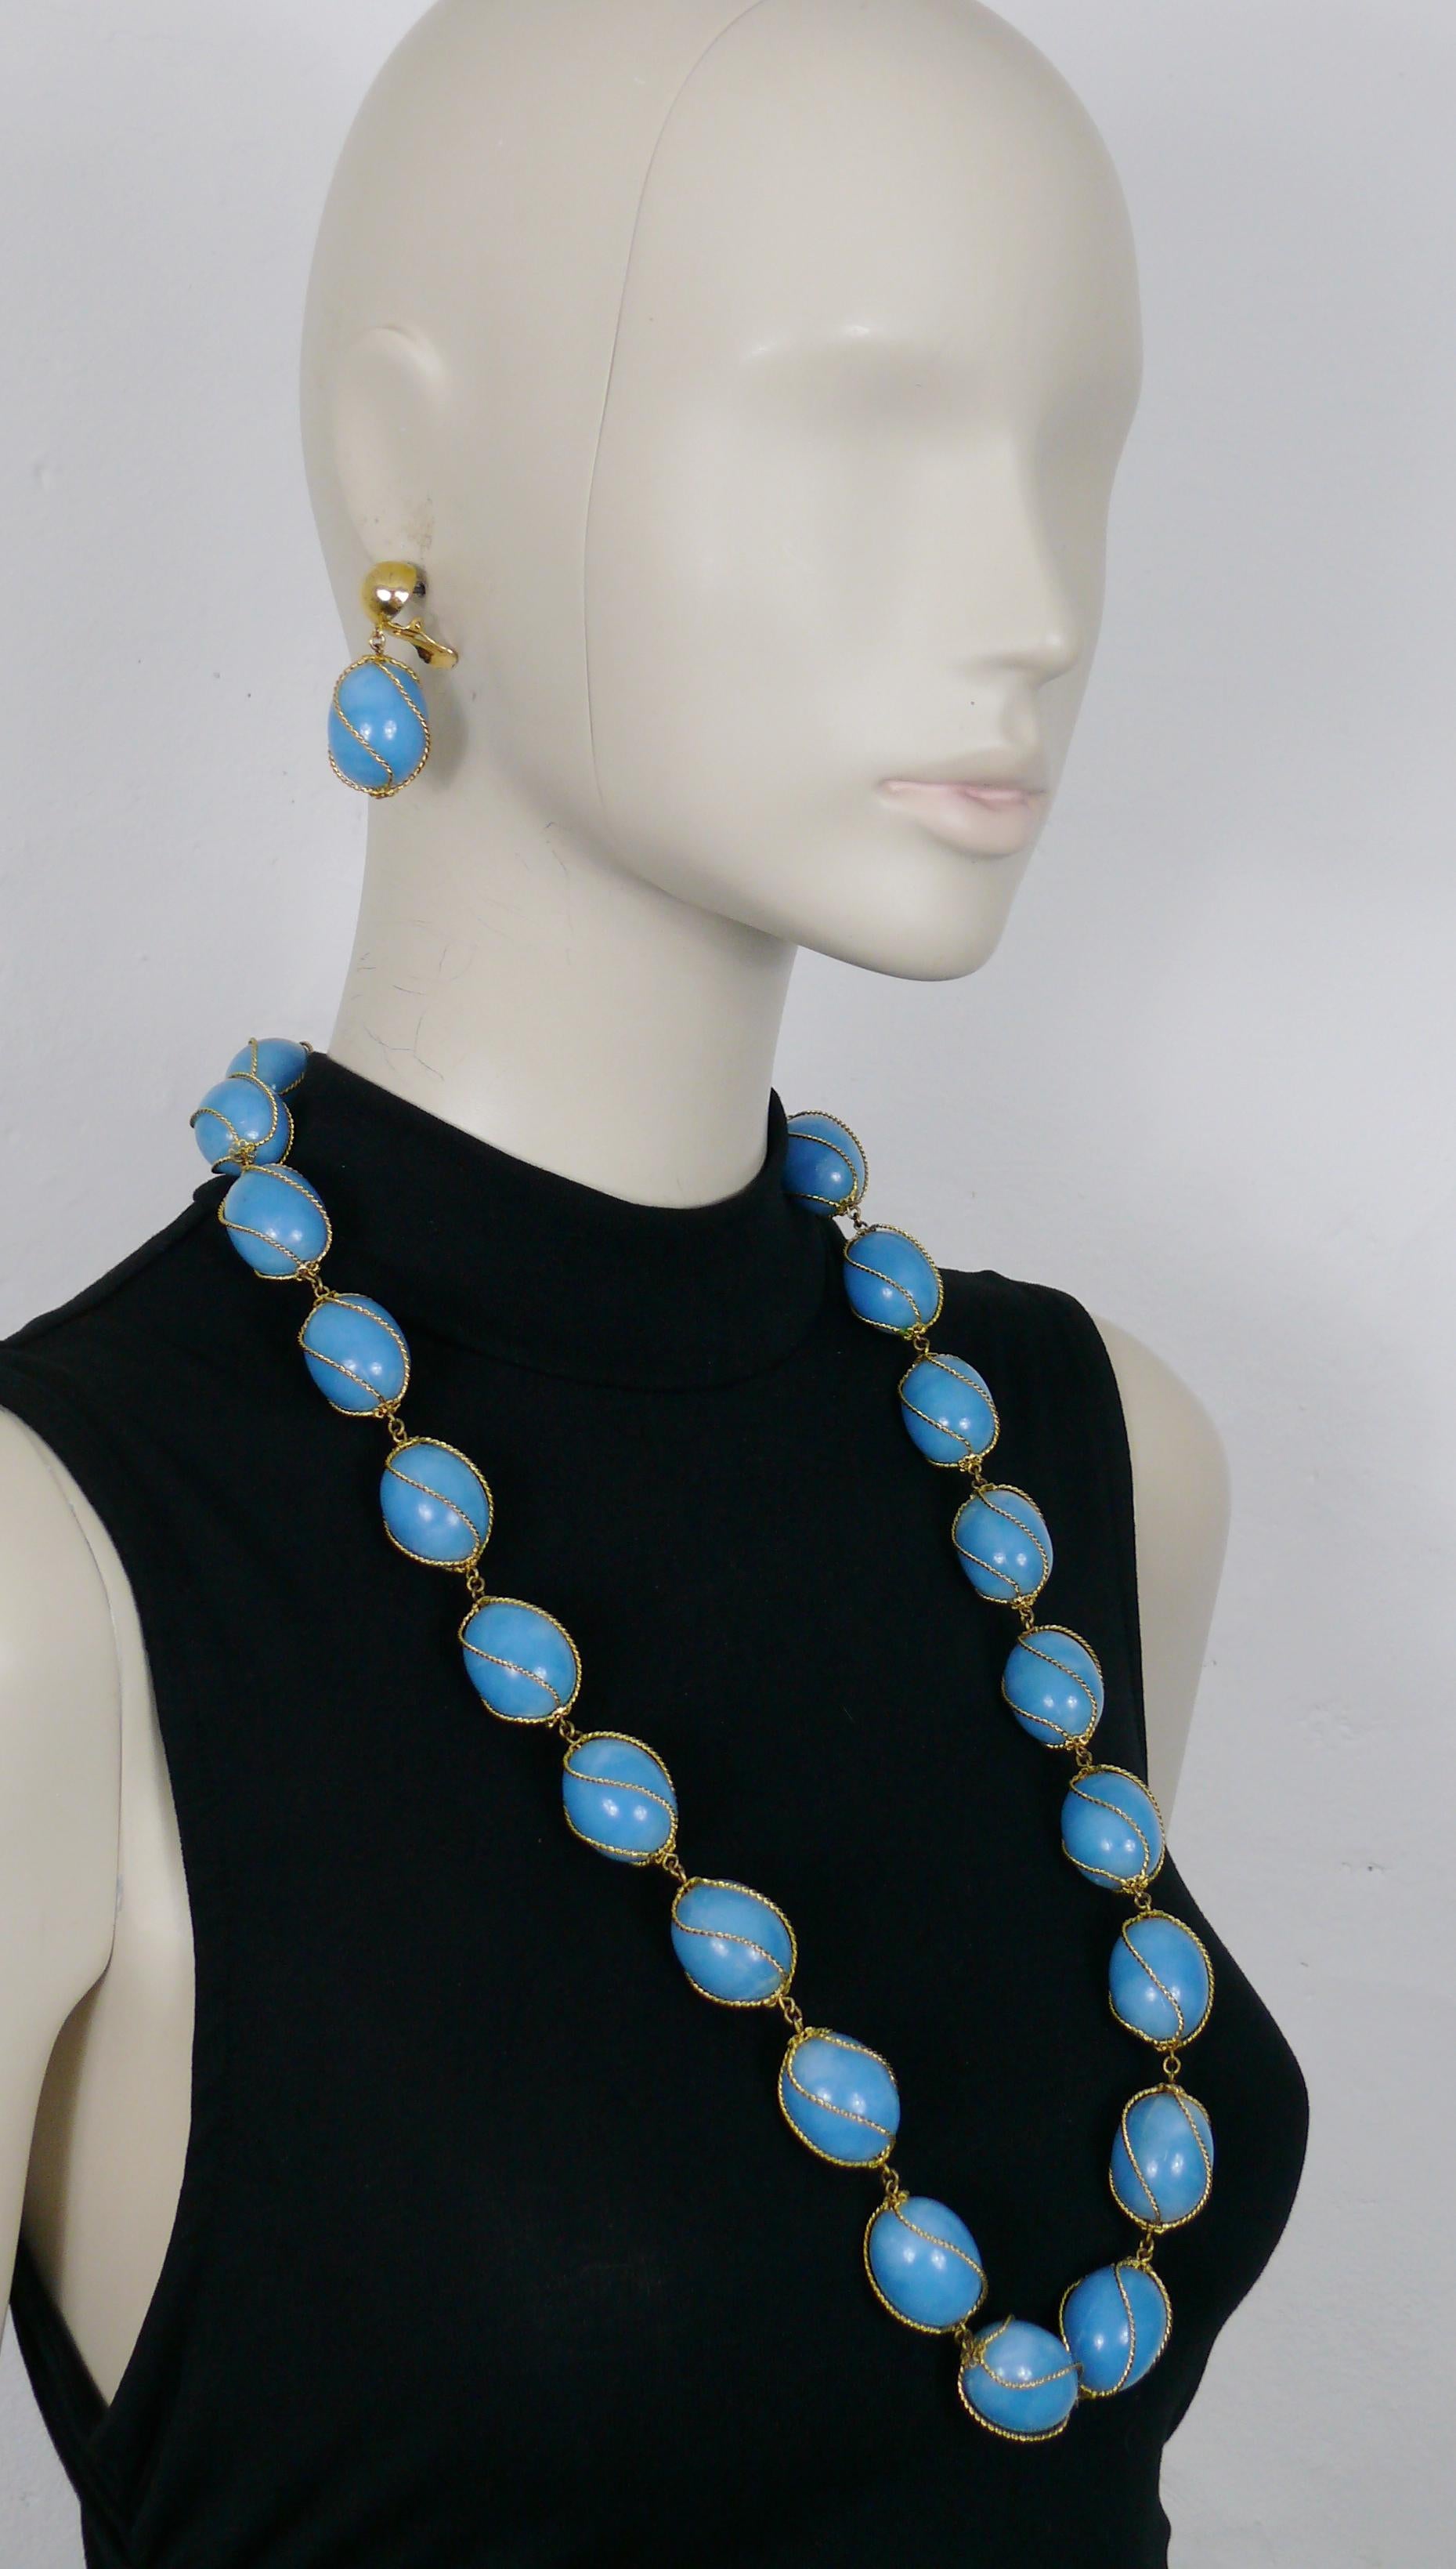 CHRISTIAN DIOR vintage necklace and dangling earrings (clip-on) set featuring gorgeous links made of large olive shaped marbled blue resin beads encaged in a gold toned setting.

Embossed  CHR. DIOR 1966 GERMANY on the reverse of the earrings.
The